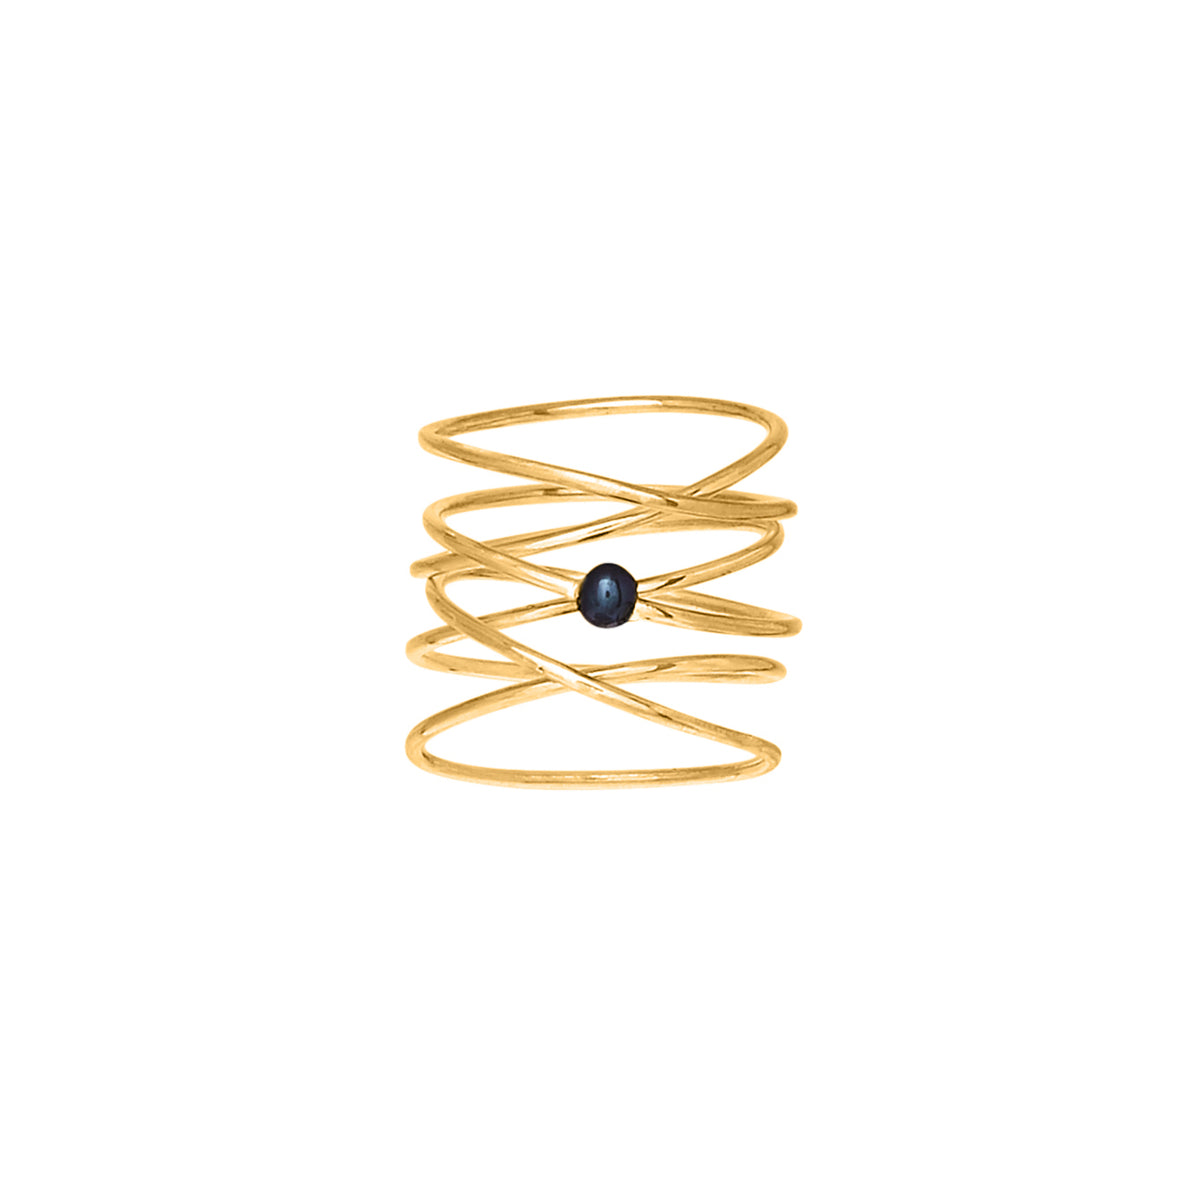 VIKA jewels 18 Karat carat gold plated vergoldet pearl Perle spiral wire ring statement handmade Bali recycled recycling sterling silver silber fashion jewellery jewelry Schmuck 